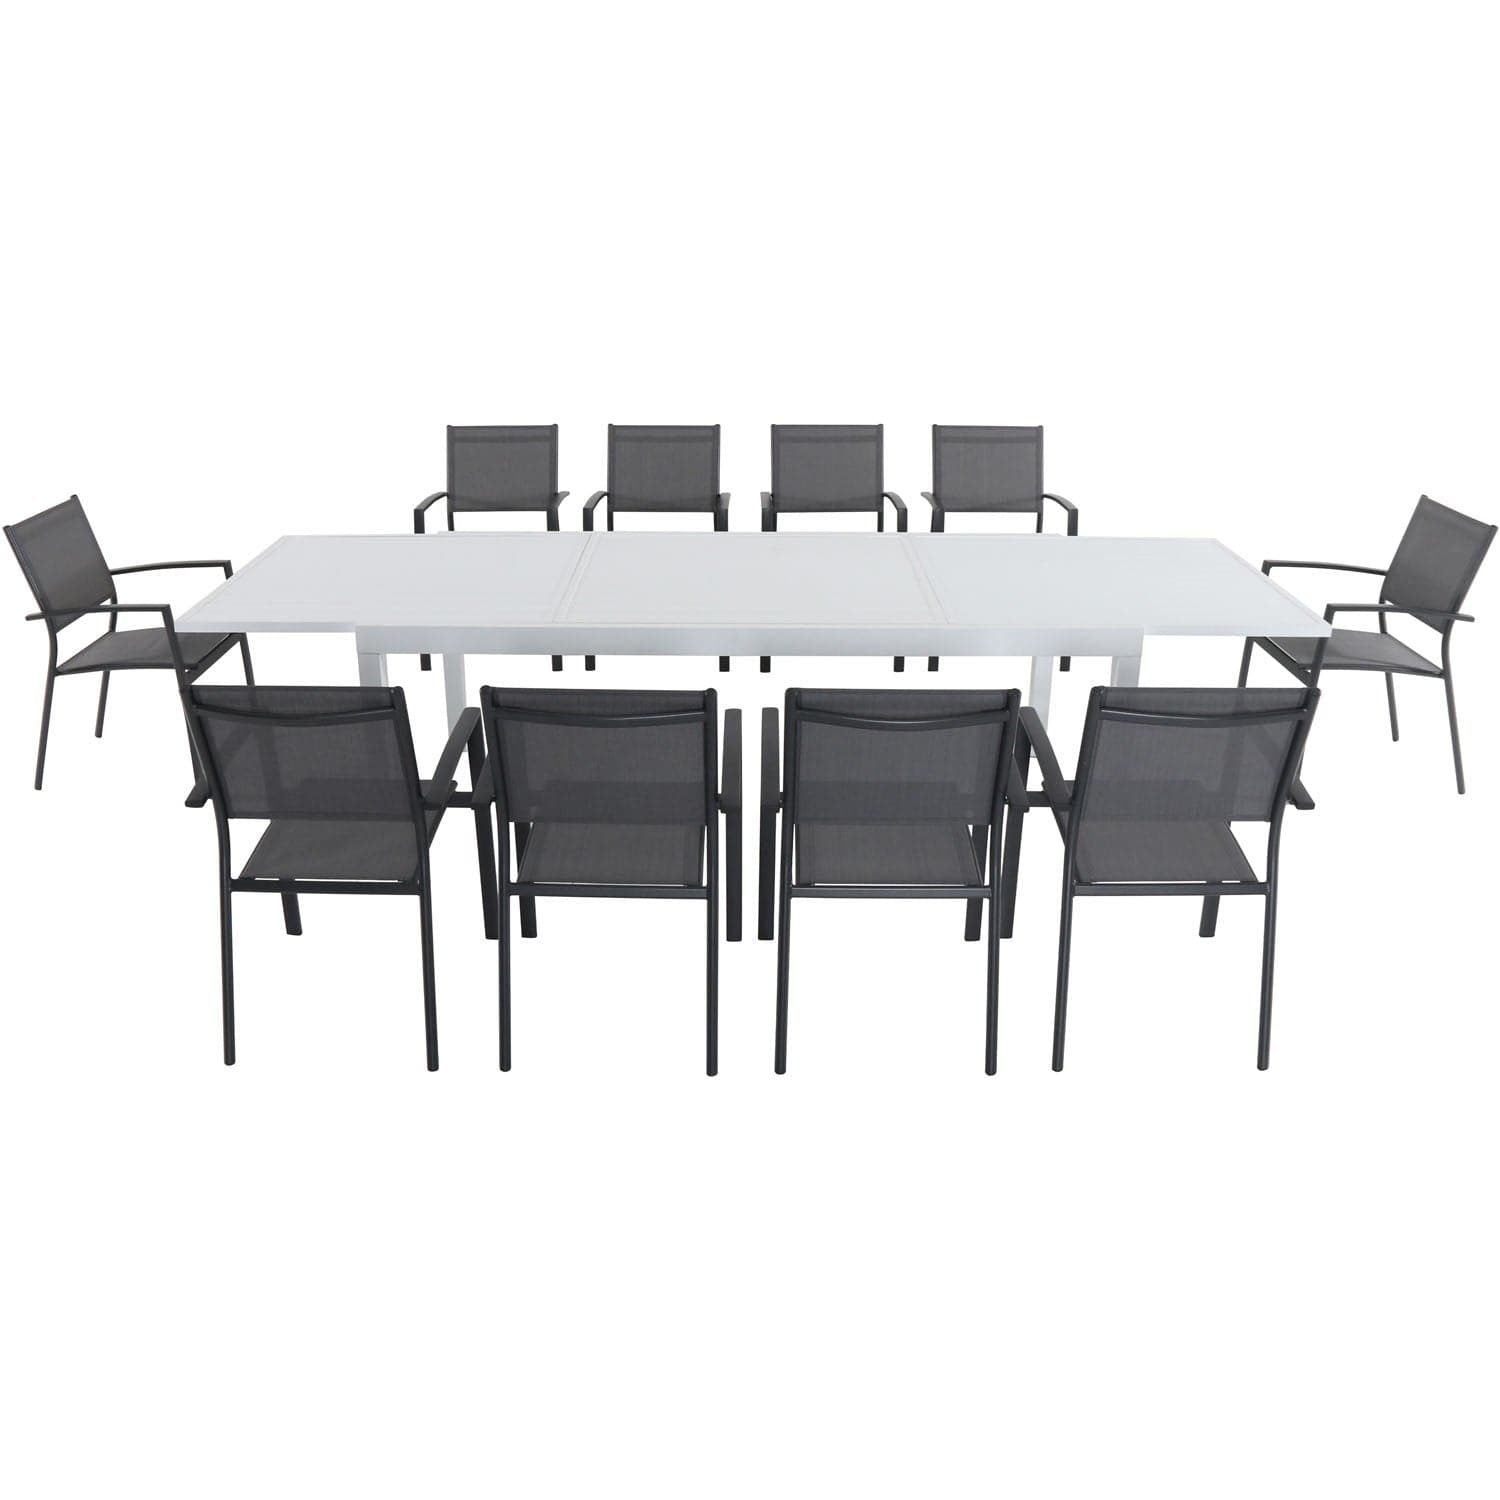 Hanover Outdoor Dining Set Hanover Del Mar 11 Piece Outdoor Dining Set with 10 Sling Chairs in Gray and a 40" x 118" Expandable Dining Table | DELDN11PC-WG